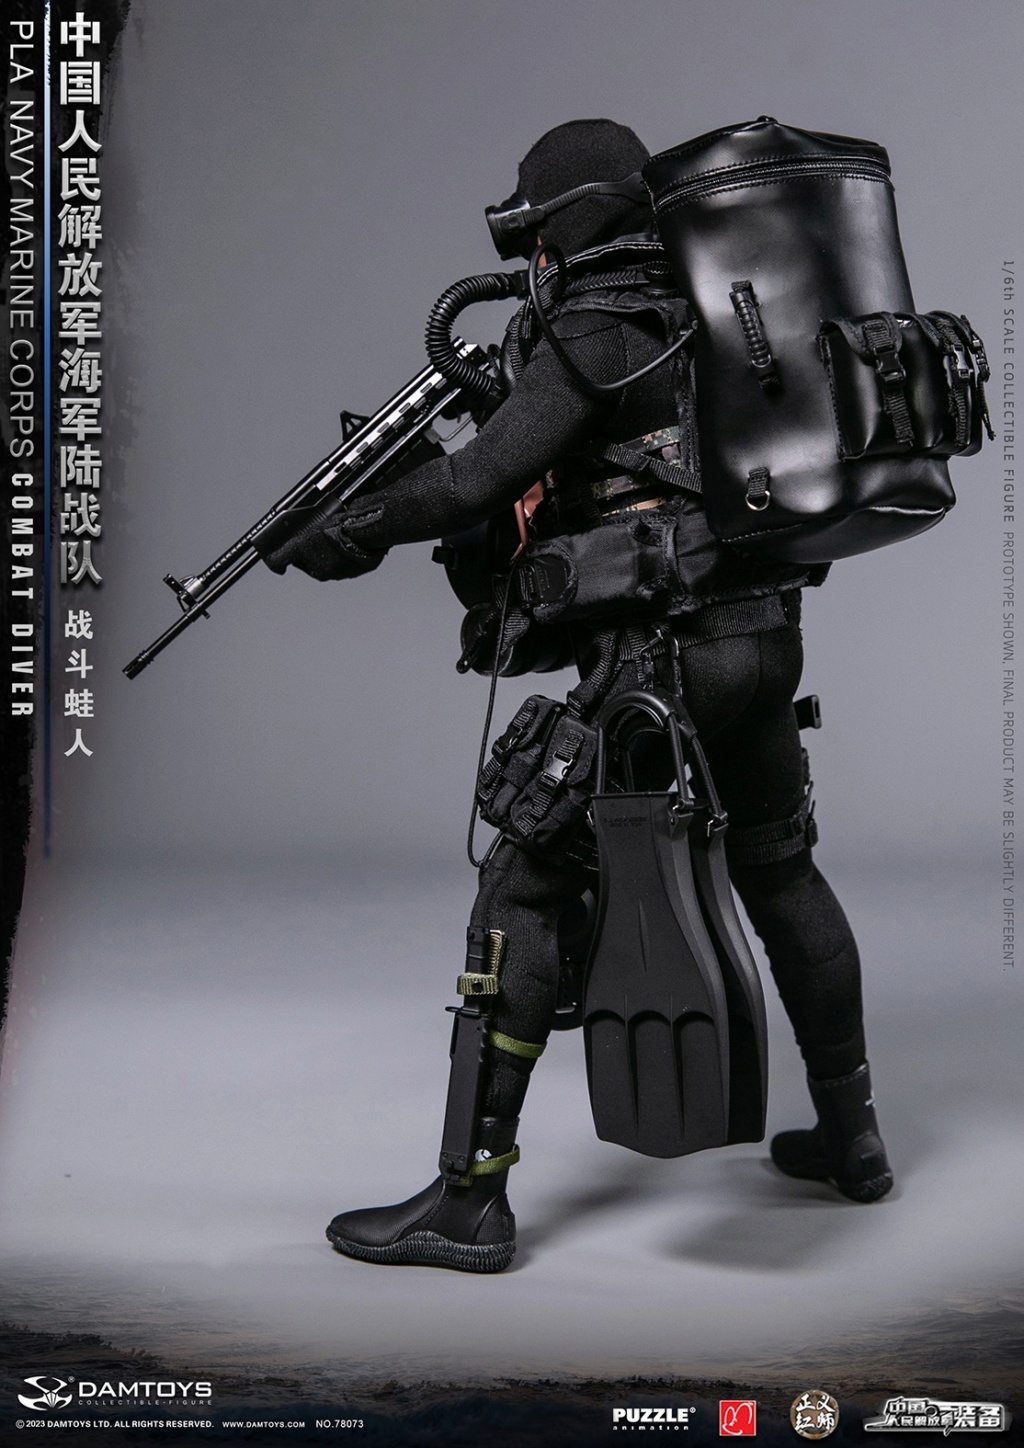 NEW PRODUCT: DAMToys: 1/6 Chinese People's Liberation Army Marine Corps - Combat Frogman Action Figure #78073 14295710